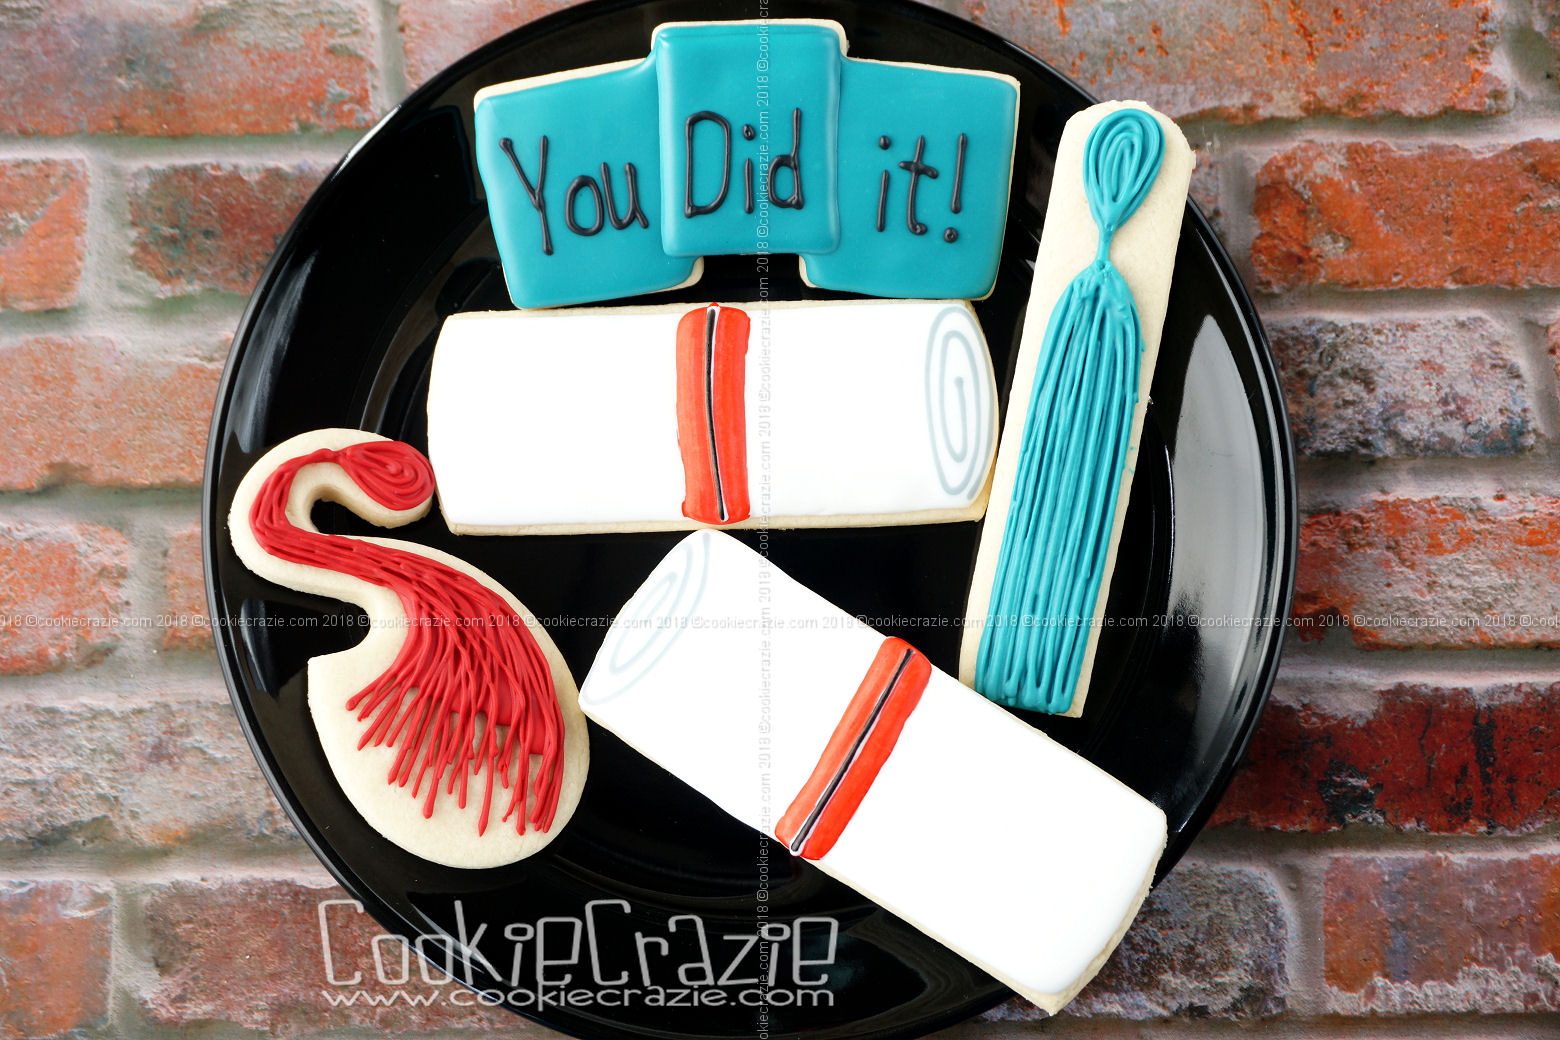  Graduation Diploma Decorated Sugar Cookie YouTube video  HERE  